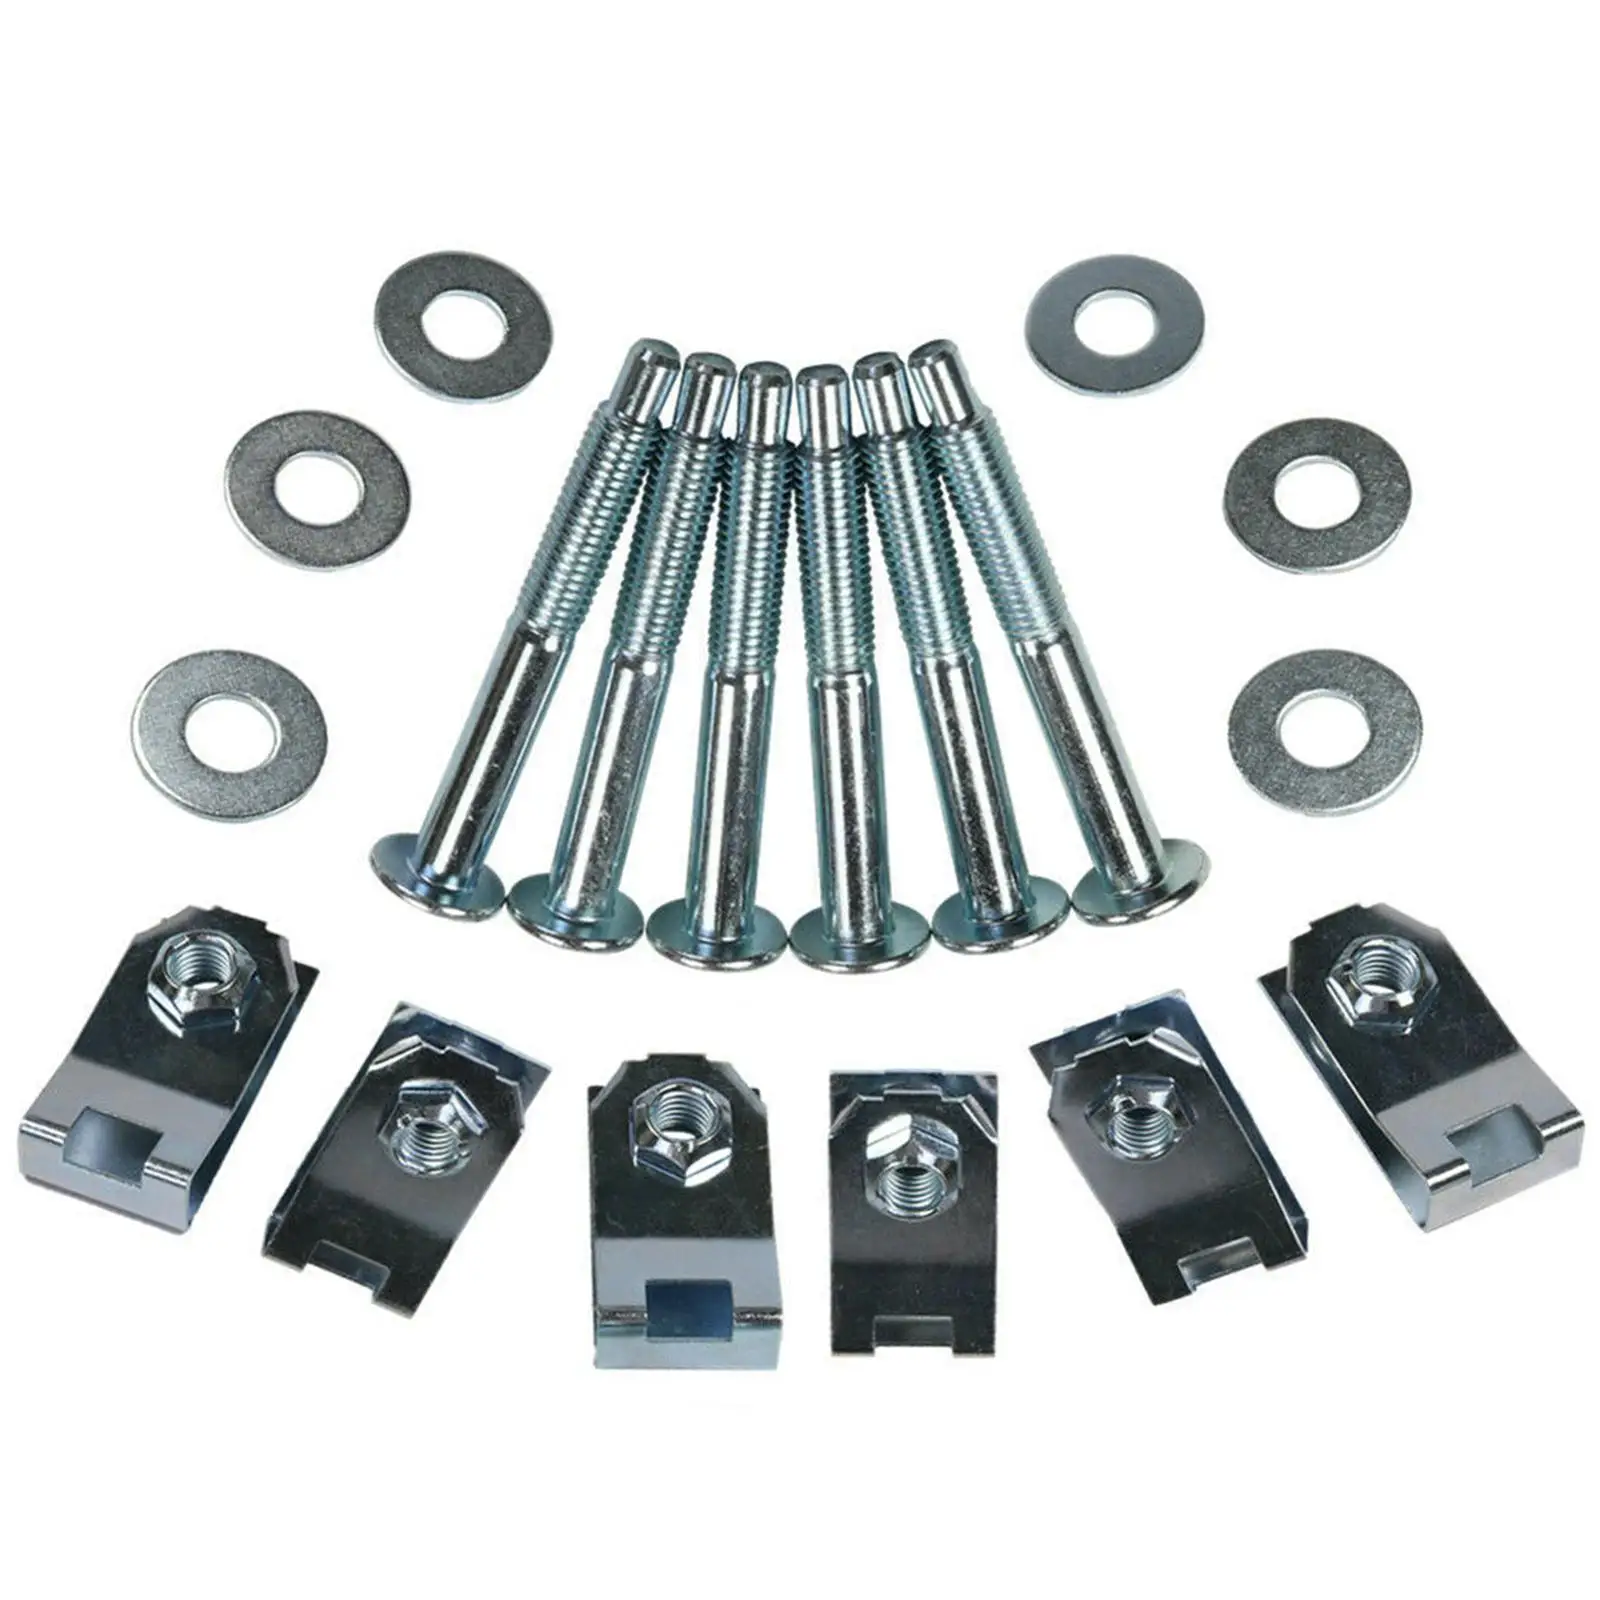 Truck Bed Mounting Hardware Kit 924-313 Fit for Durable